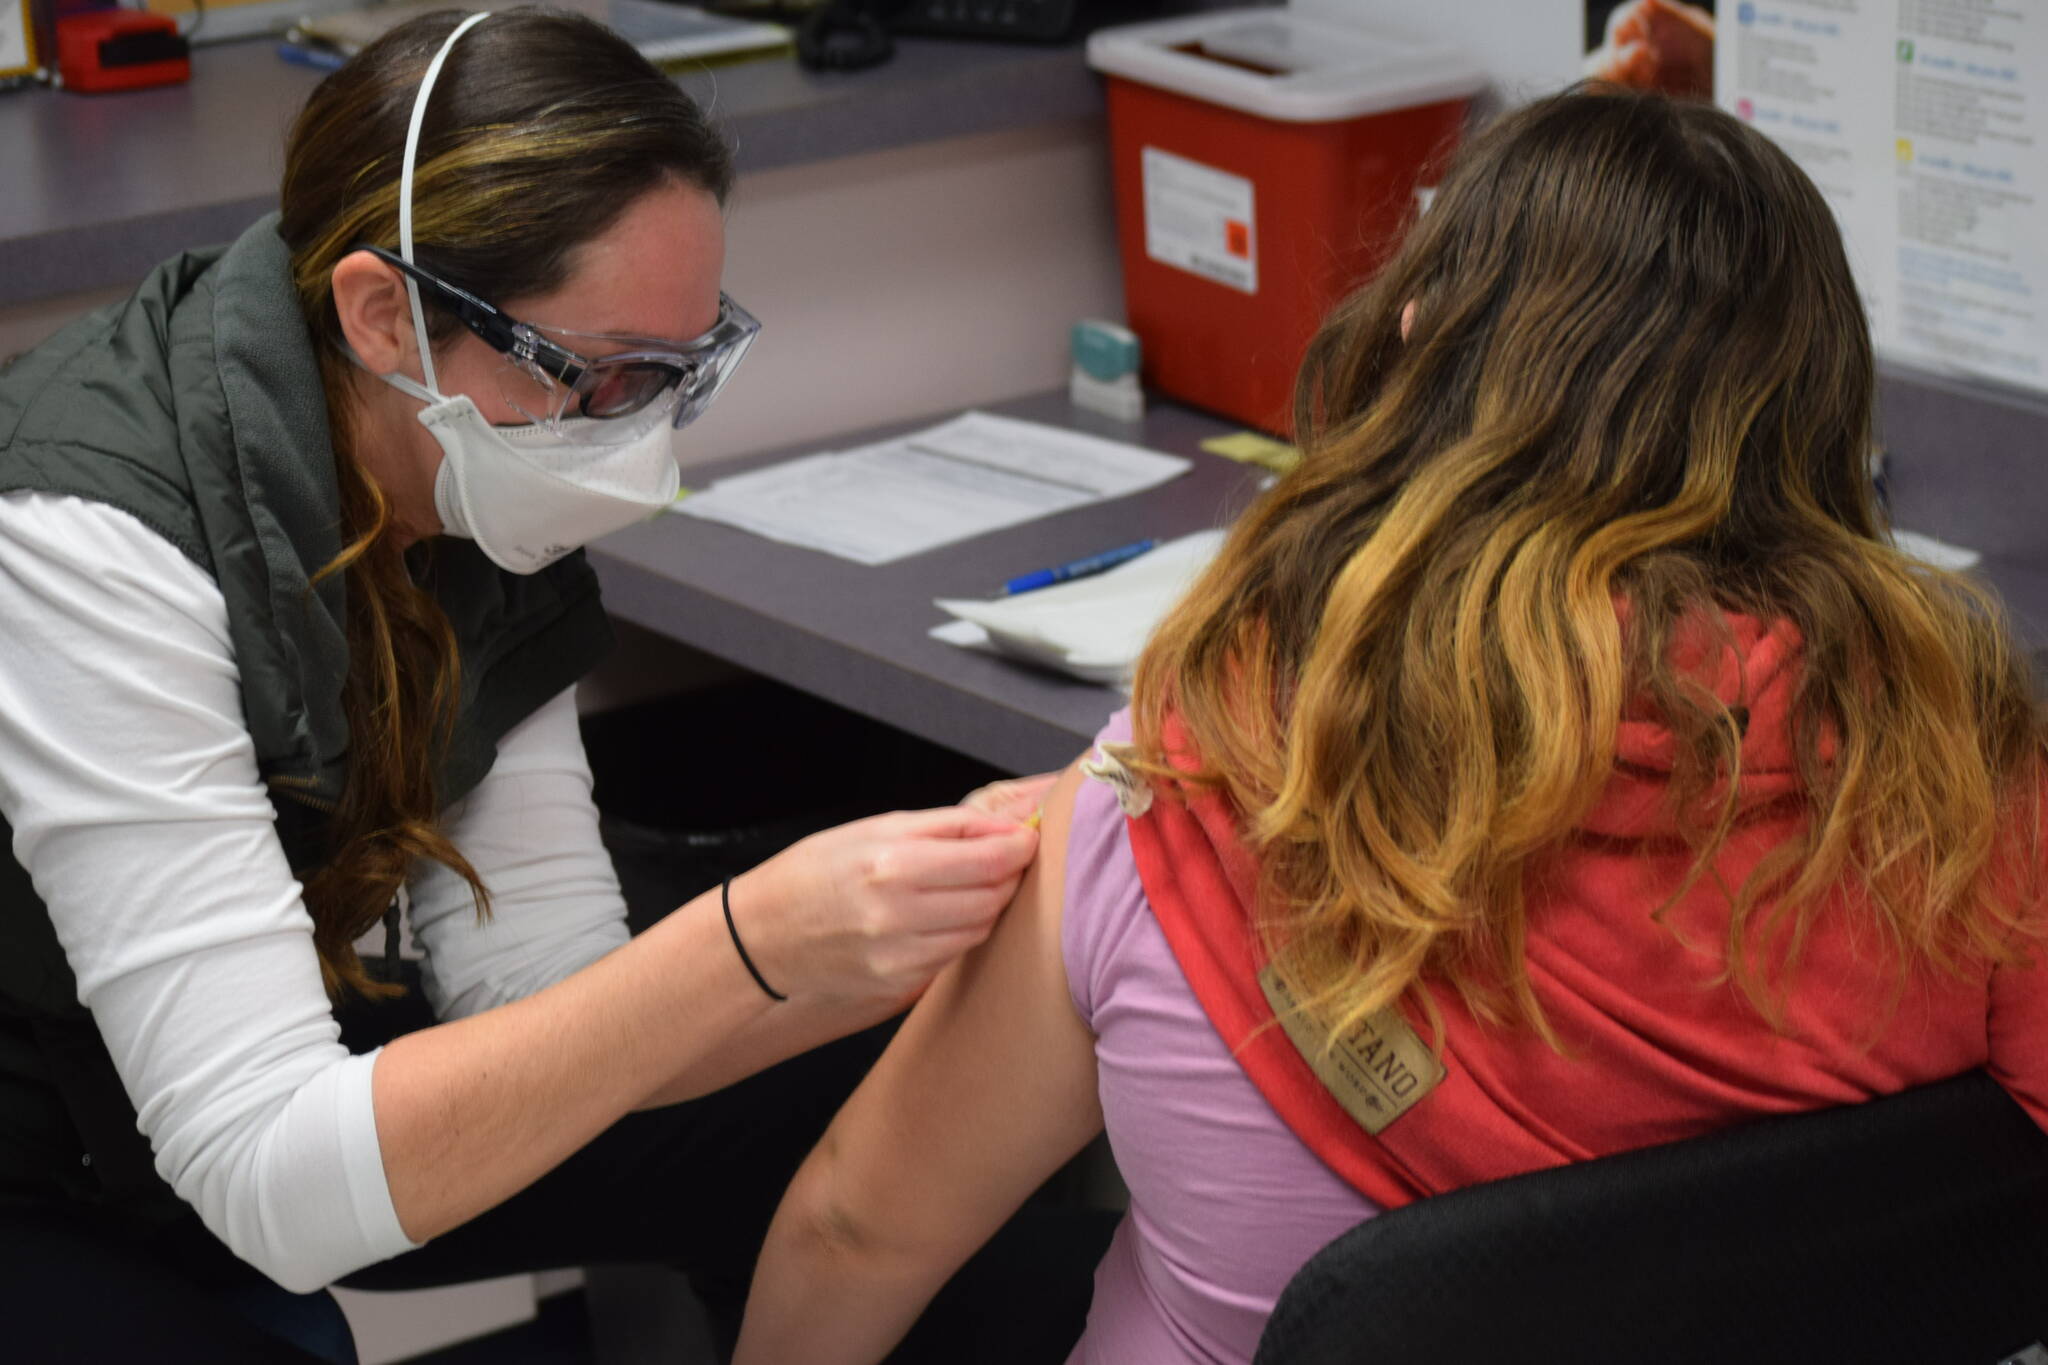 Nurse Sherra Pritchard gives Madyson Knudsen a bandage at the Kenai Public Health Center after the 10-year-old received her first COVID-19 vaccine on Friday, Nov. 5, 2021. (Camille Botello/Peninsula Clarion file)